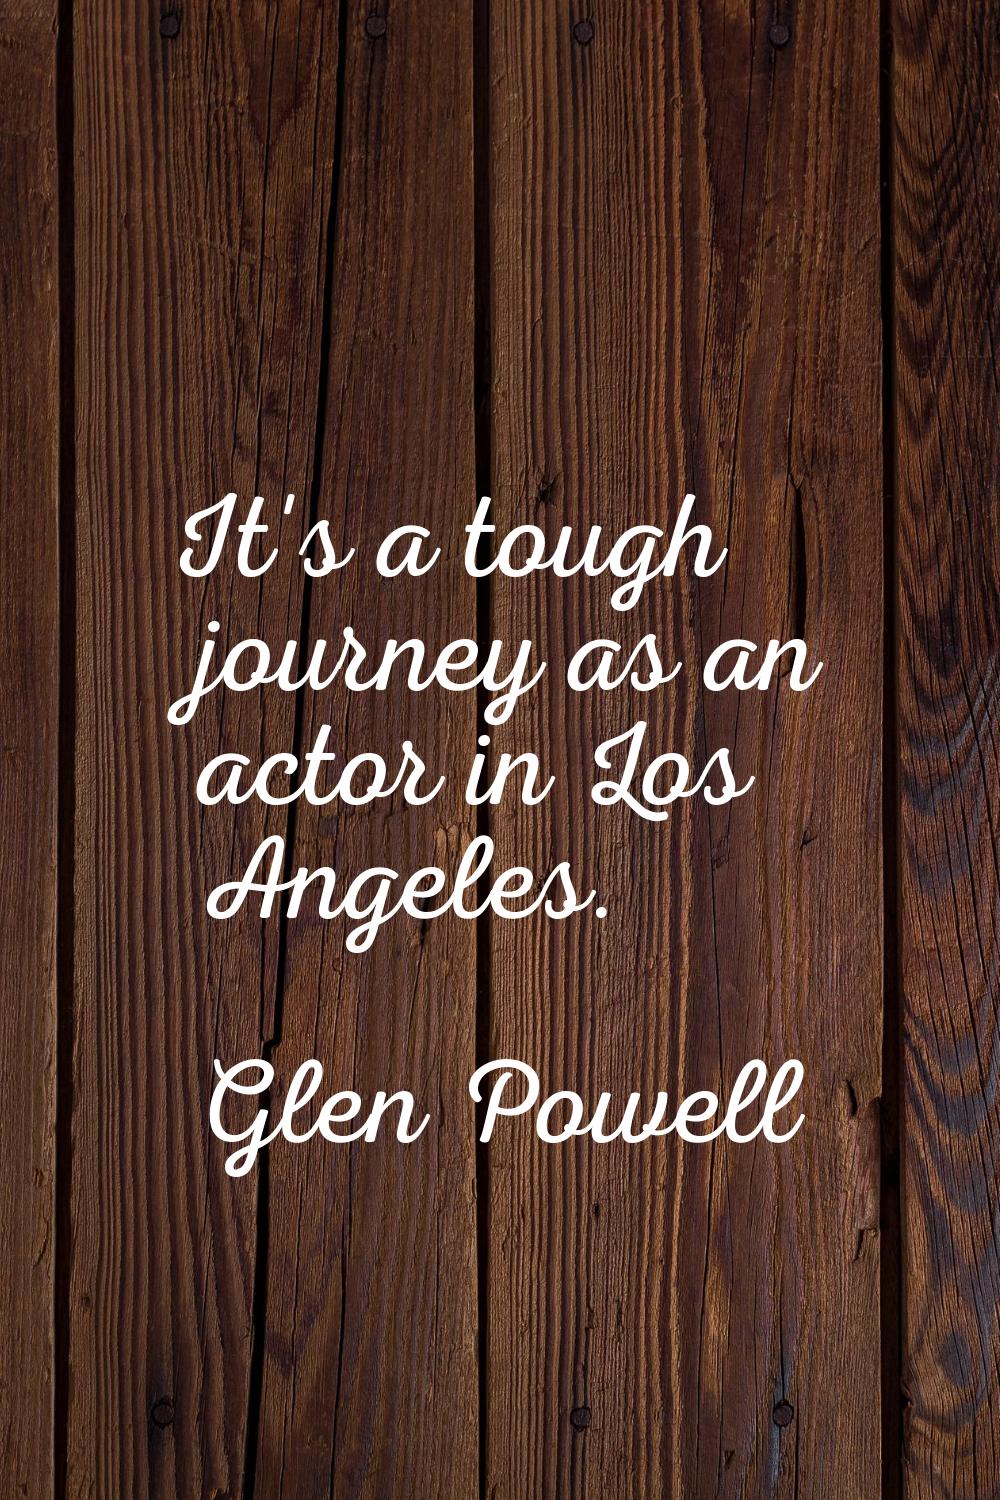 It's a tough journey as an actor in Los Angeles.